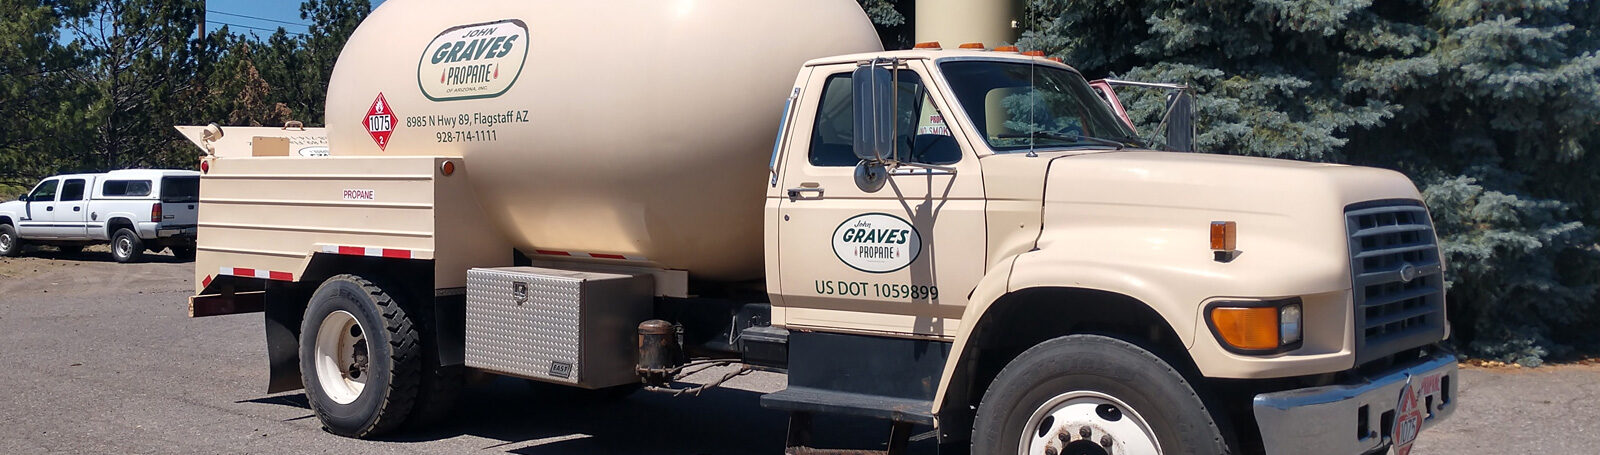 Flagstaff Propane Delivery Truck